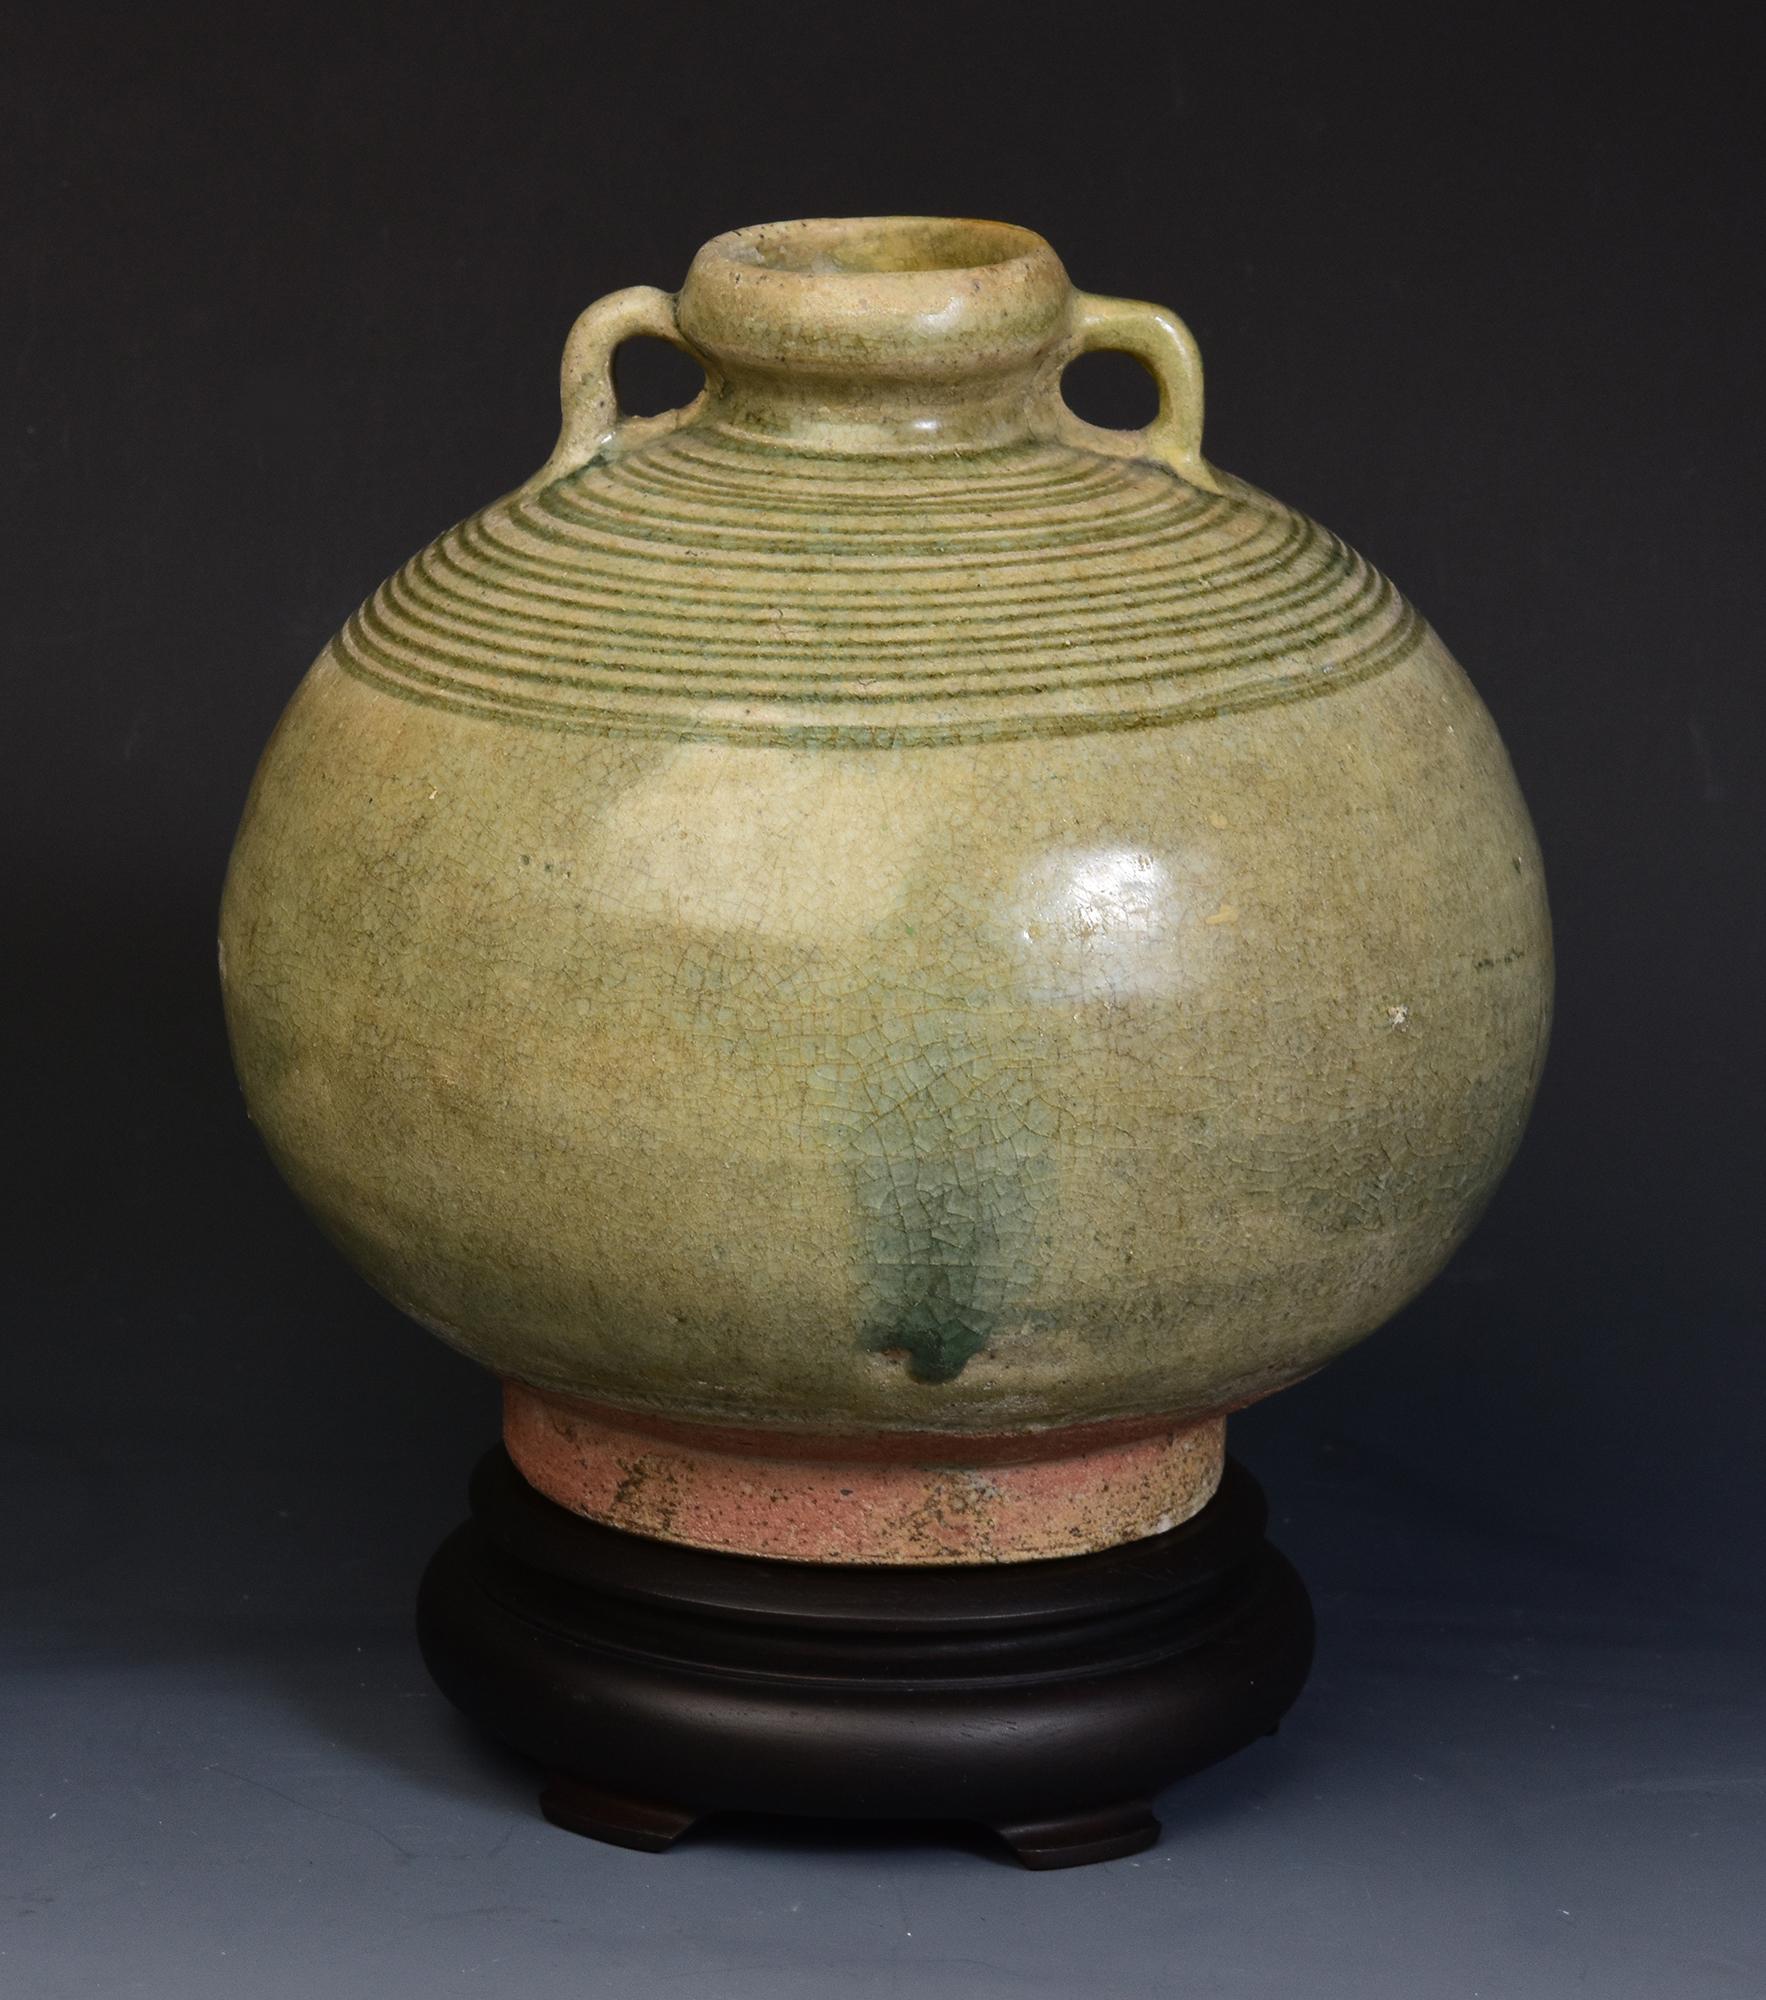 Antique Thai Sukhothai celadon glazed pottery bottle.

Age: Thailand, Sukhothai Period, 14th - 16th Century
Size: Height 17 C.M. / Width 17.4 C.M. (size excluding stand)
Condition: Nice glaze and condition overall (some expected degradation due to